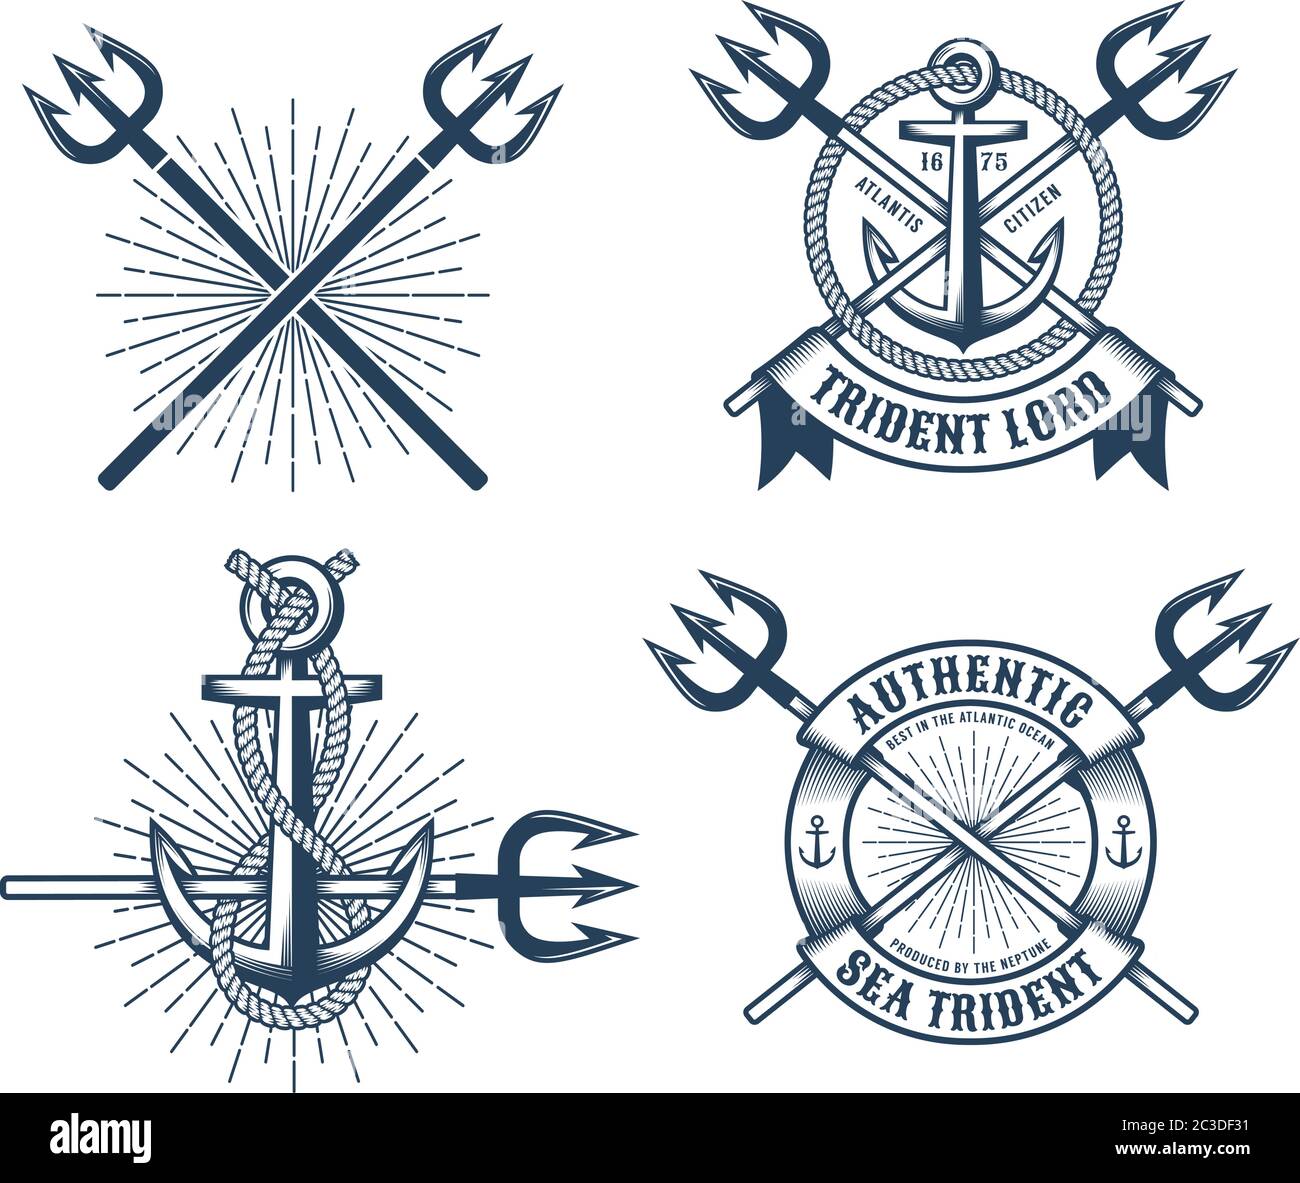 Navy Seal Insignia by InvisiblePuppy on DeviantArt